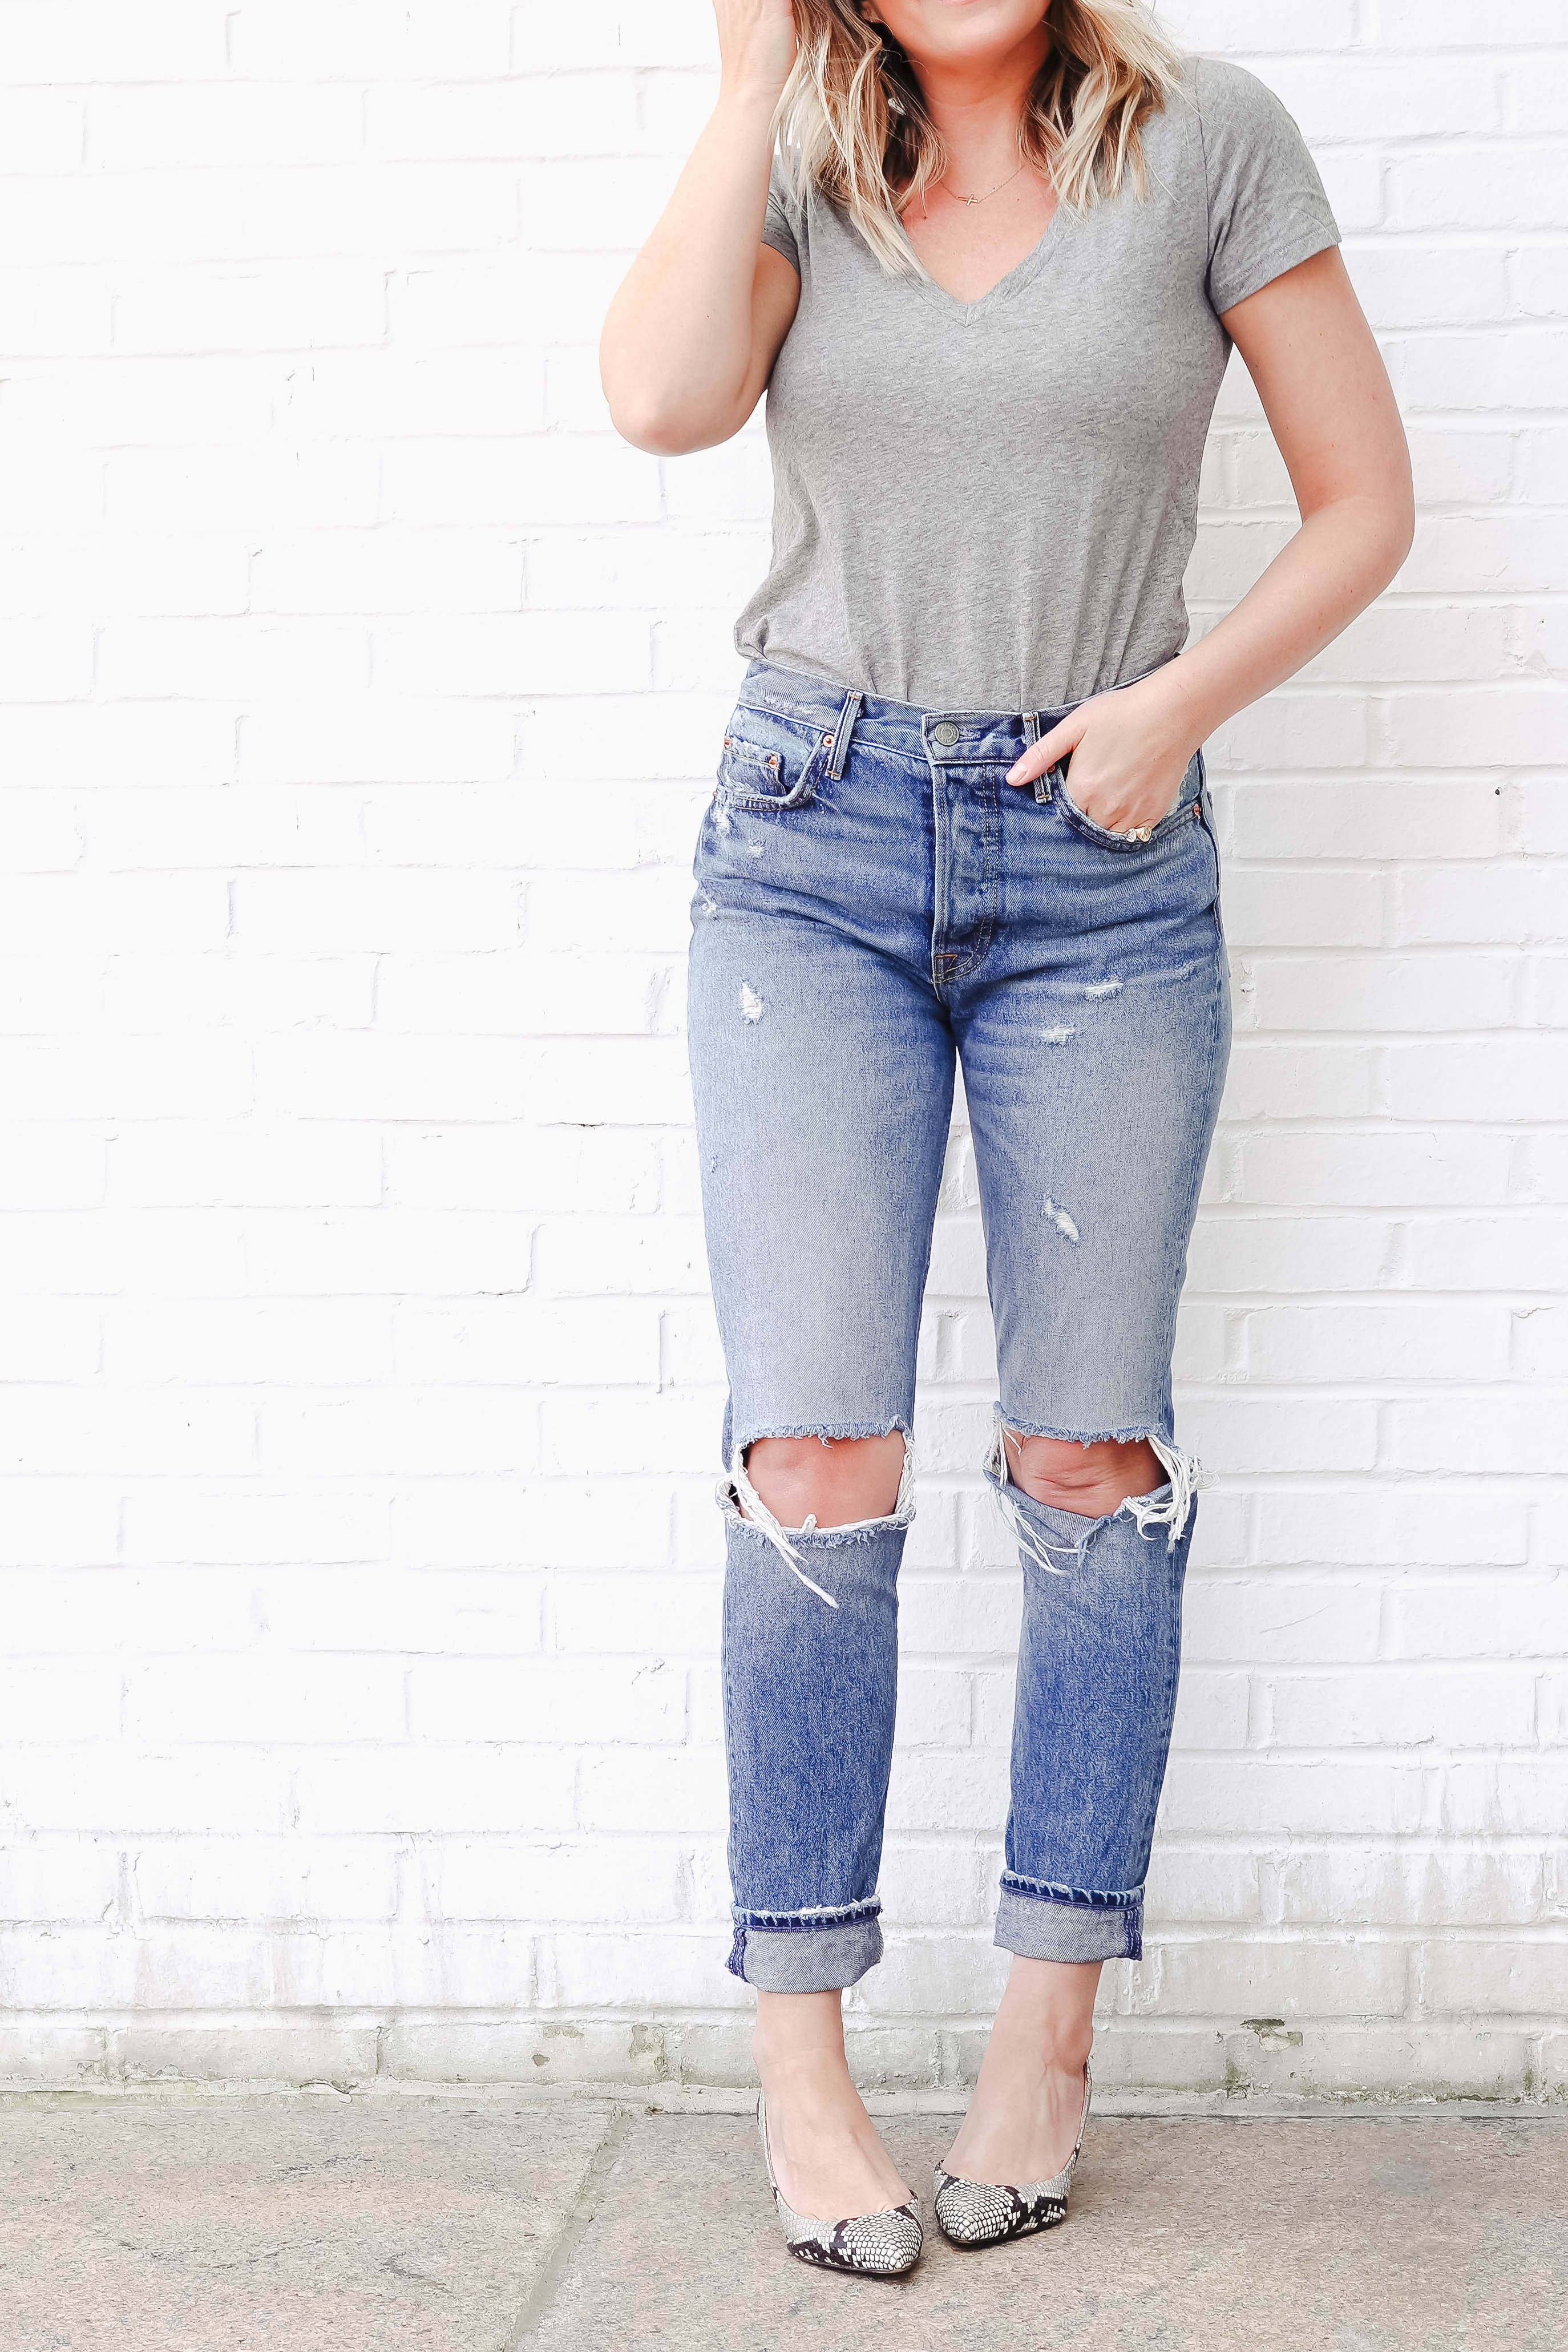 Jeans and t-shirt outfit ideas